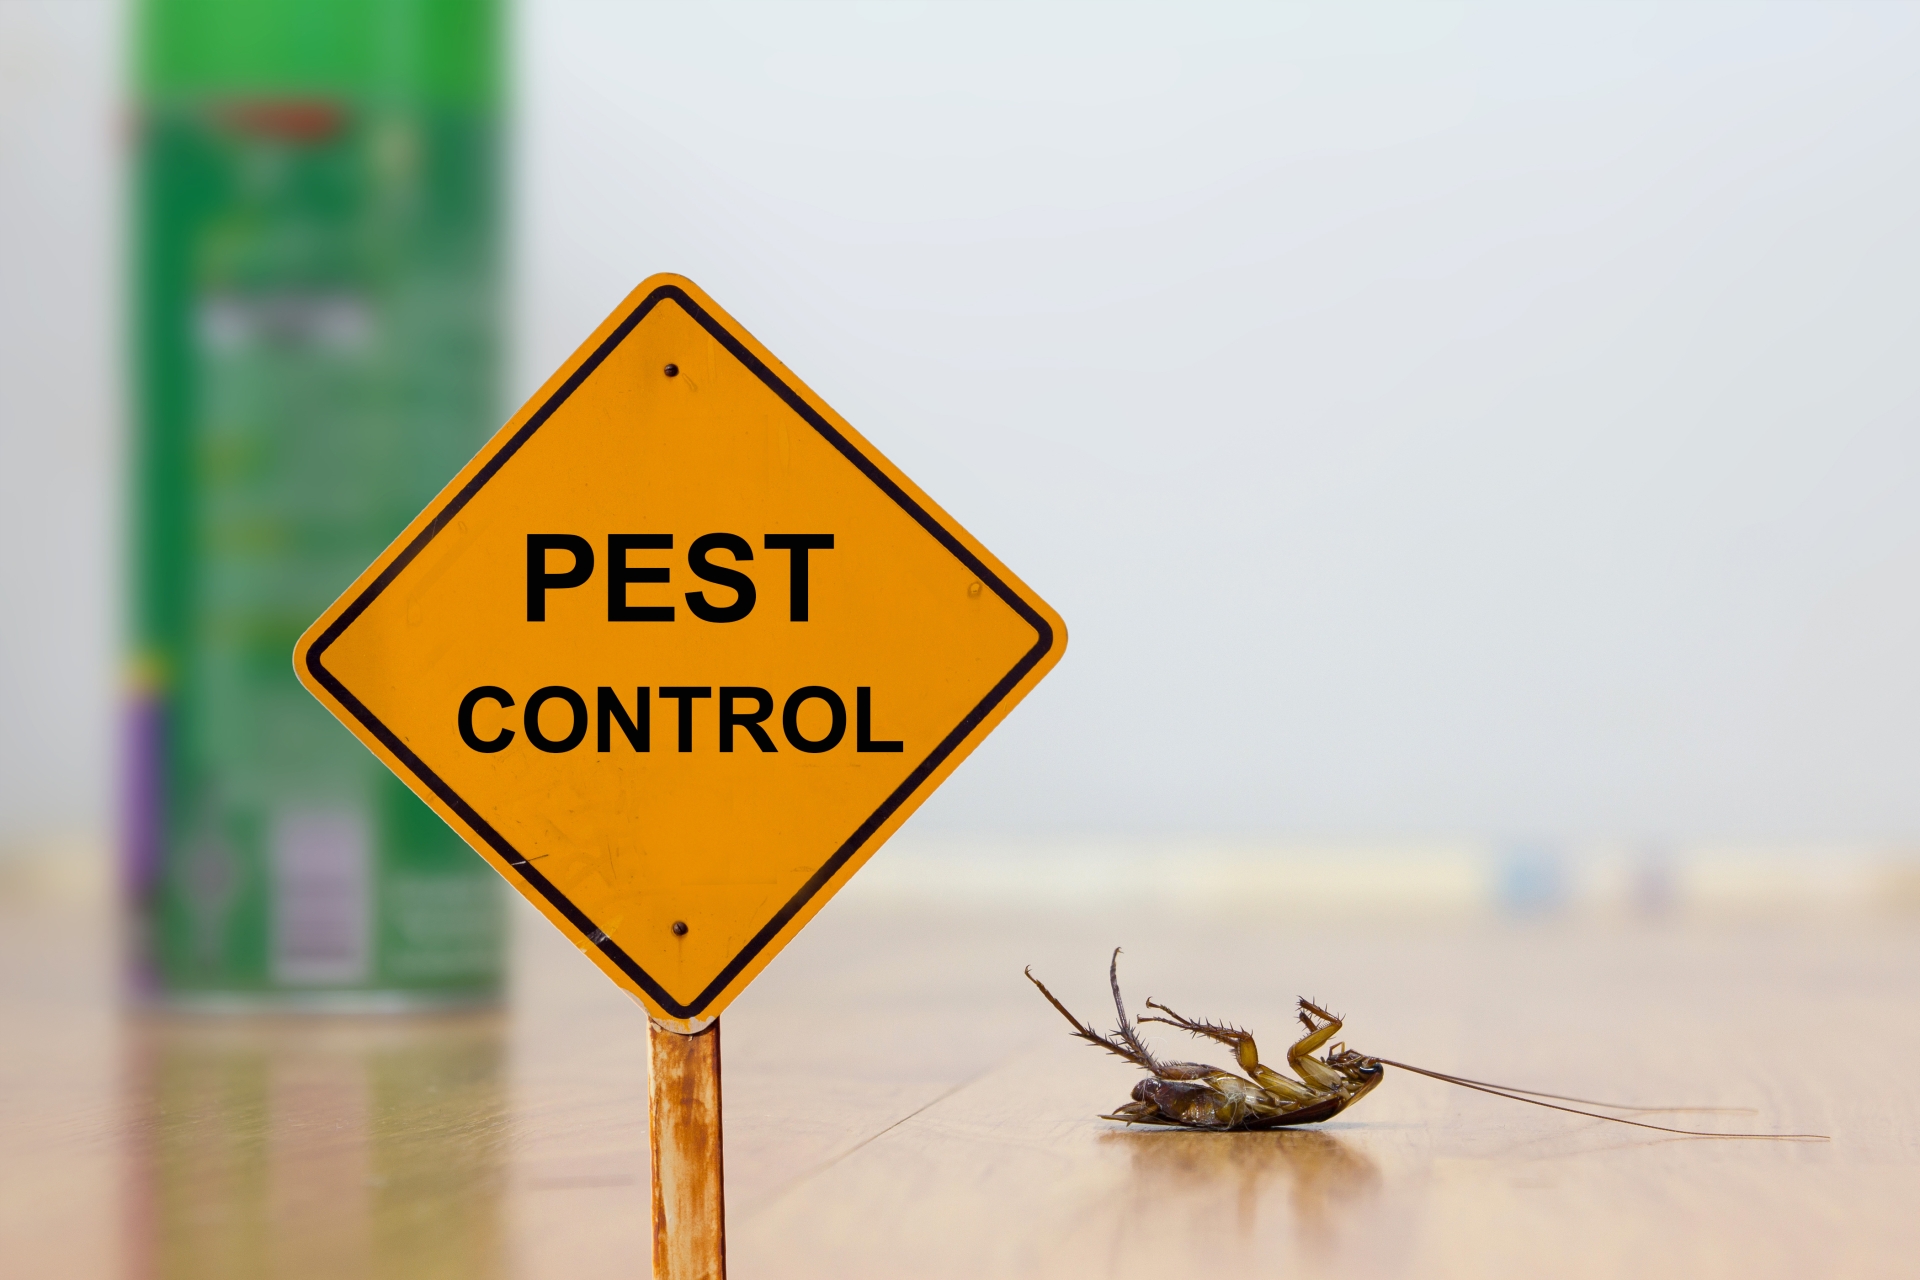 24 Hour Pest Control, Pest Control in Garston, Leavesden, WD25. Call Now 020 8166 9746